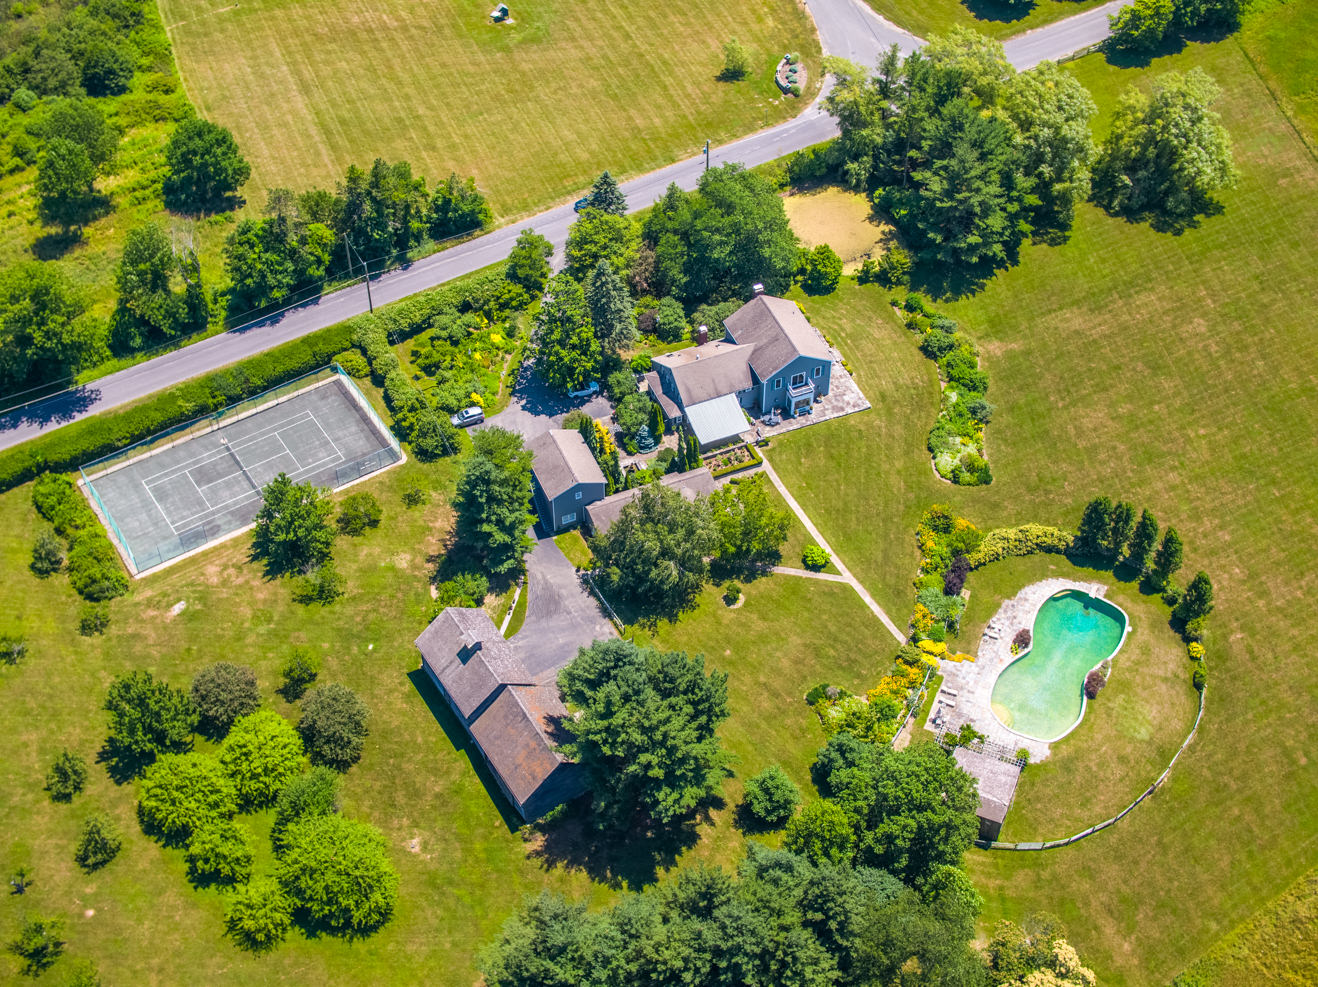 Real Estate video production in Connecticut, Massachusetts, New York. Photoflight Aerial Media